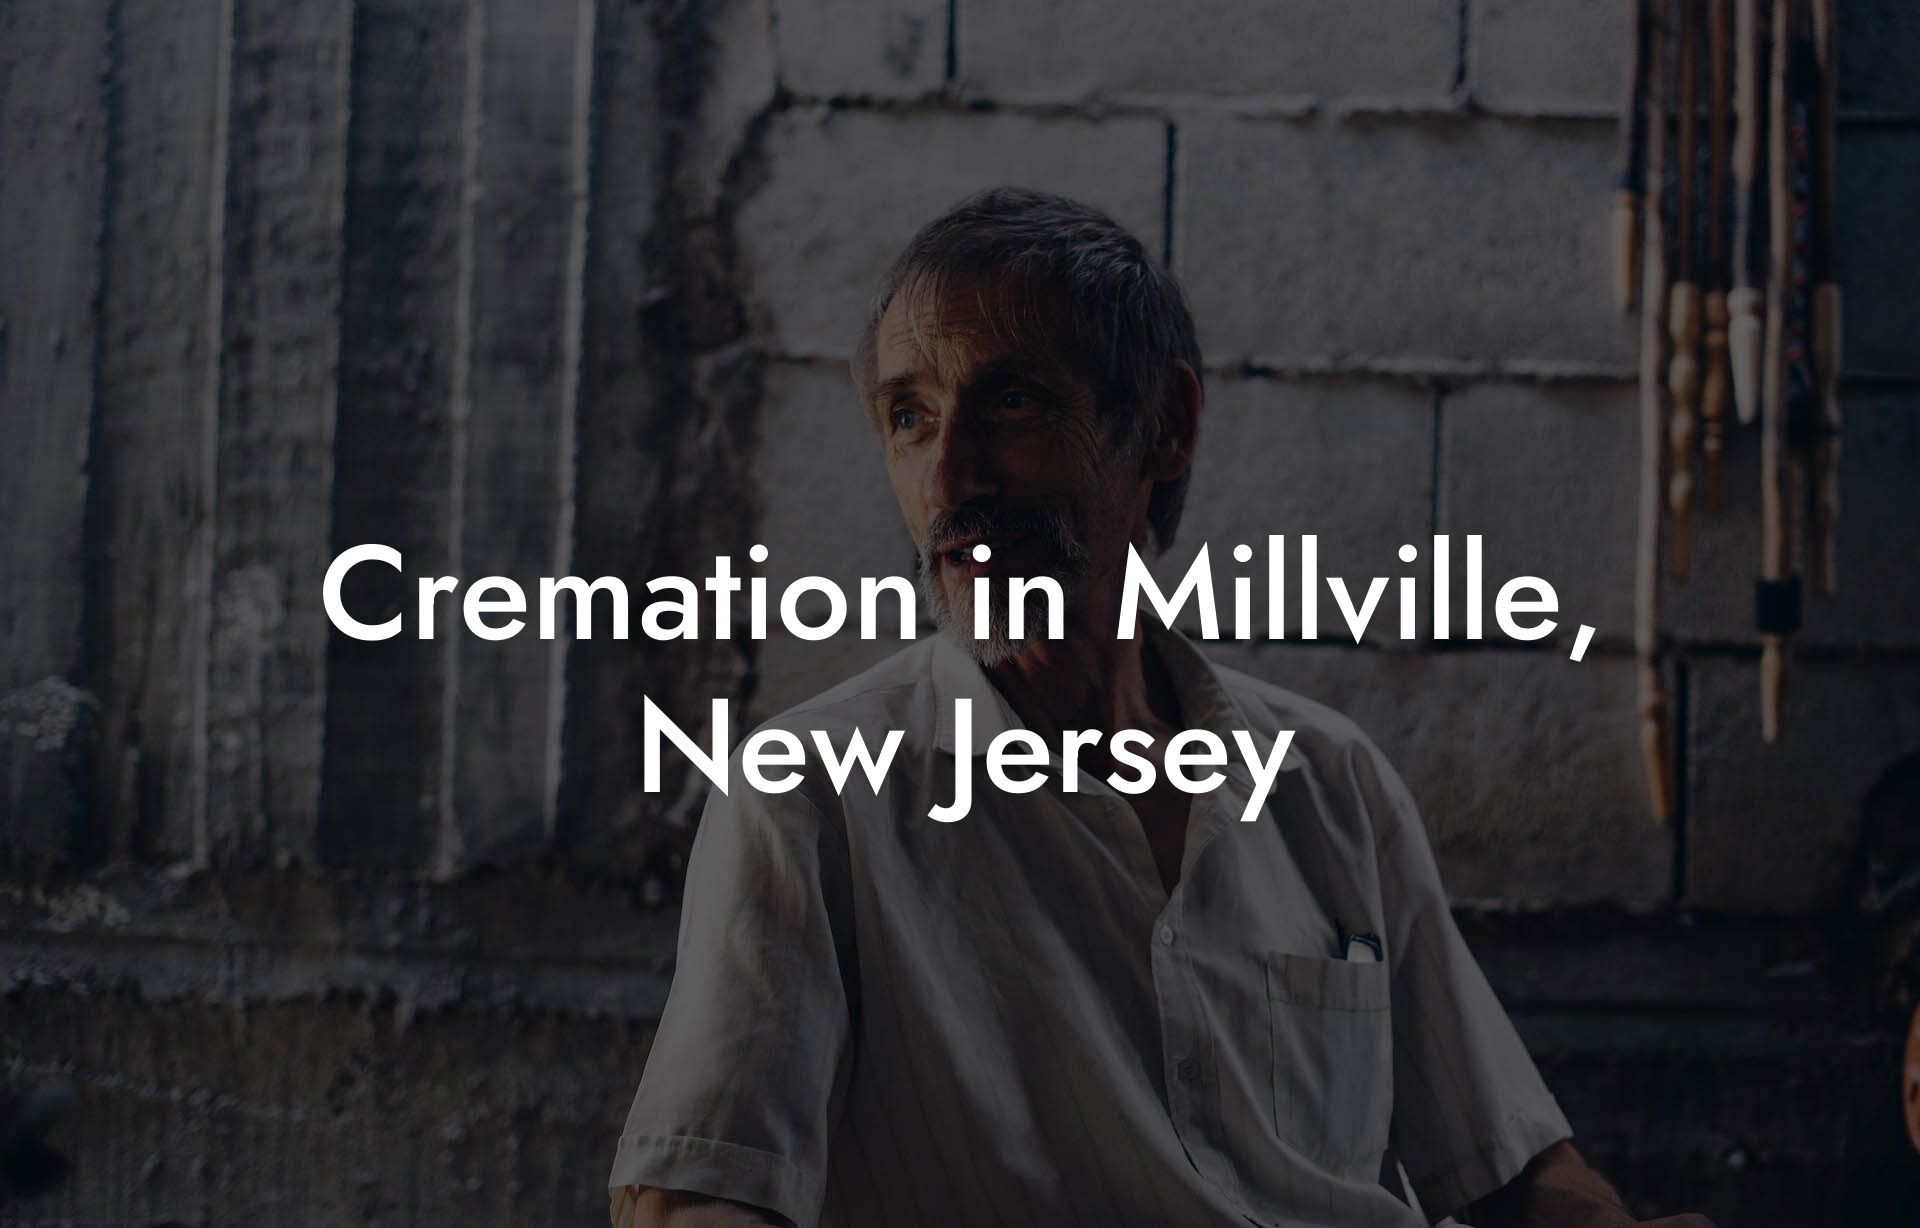 Cremation in Millville, New Jersey